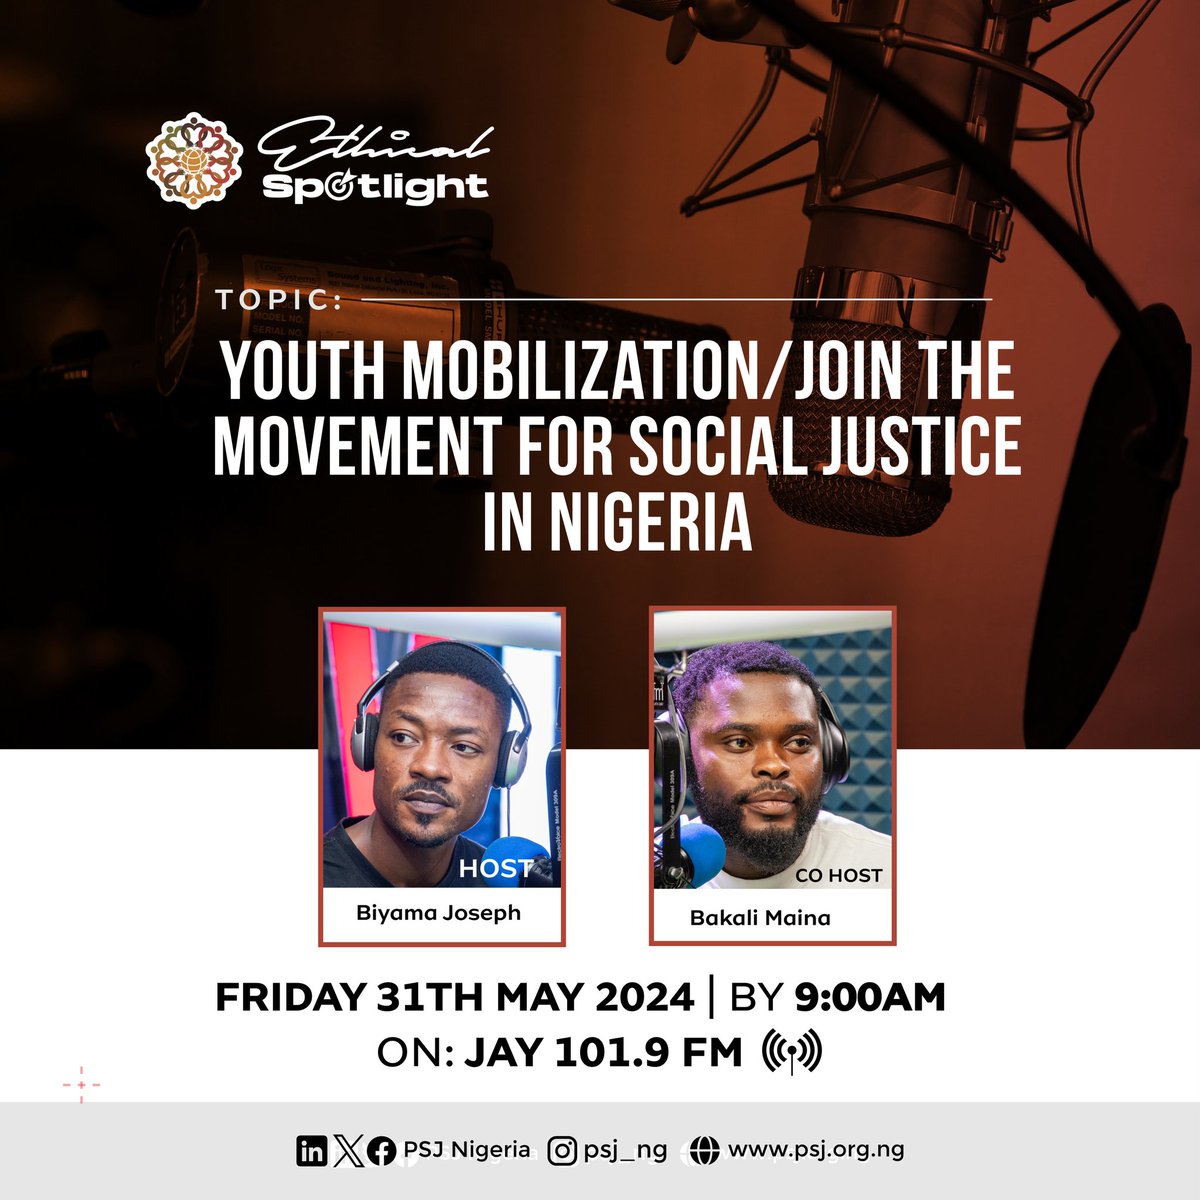 Join us at 9am as we focus on Youth mobilization/Join the movement for social justice in Nigeria.

Tune to Jay 101.9FM, Jos.

#PSJNG #EthicalSpotlight #psjonradio #socialissues #socialjustice #jointhemovementpsj #youthmobilization #youthmobilizationmovement